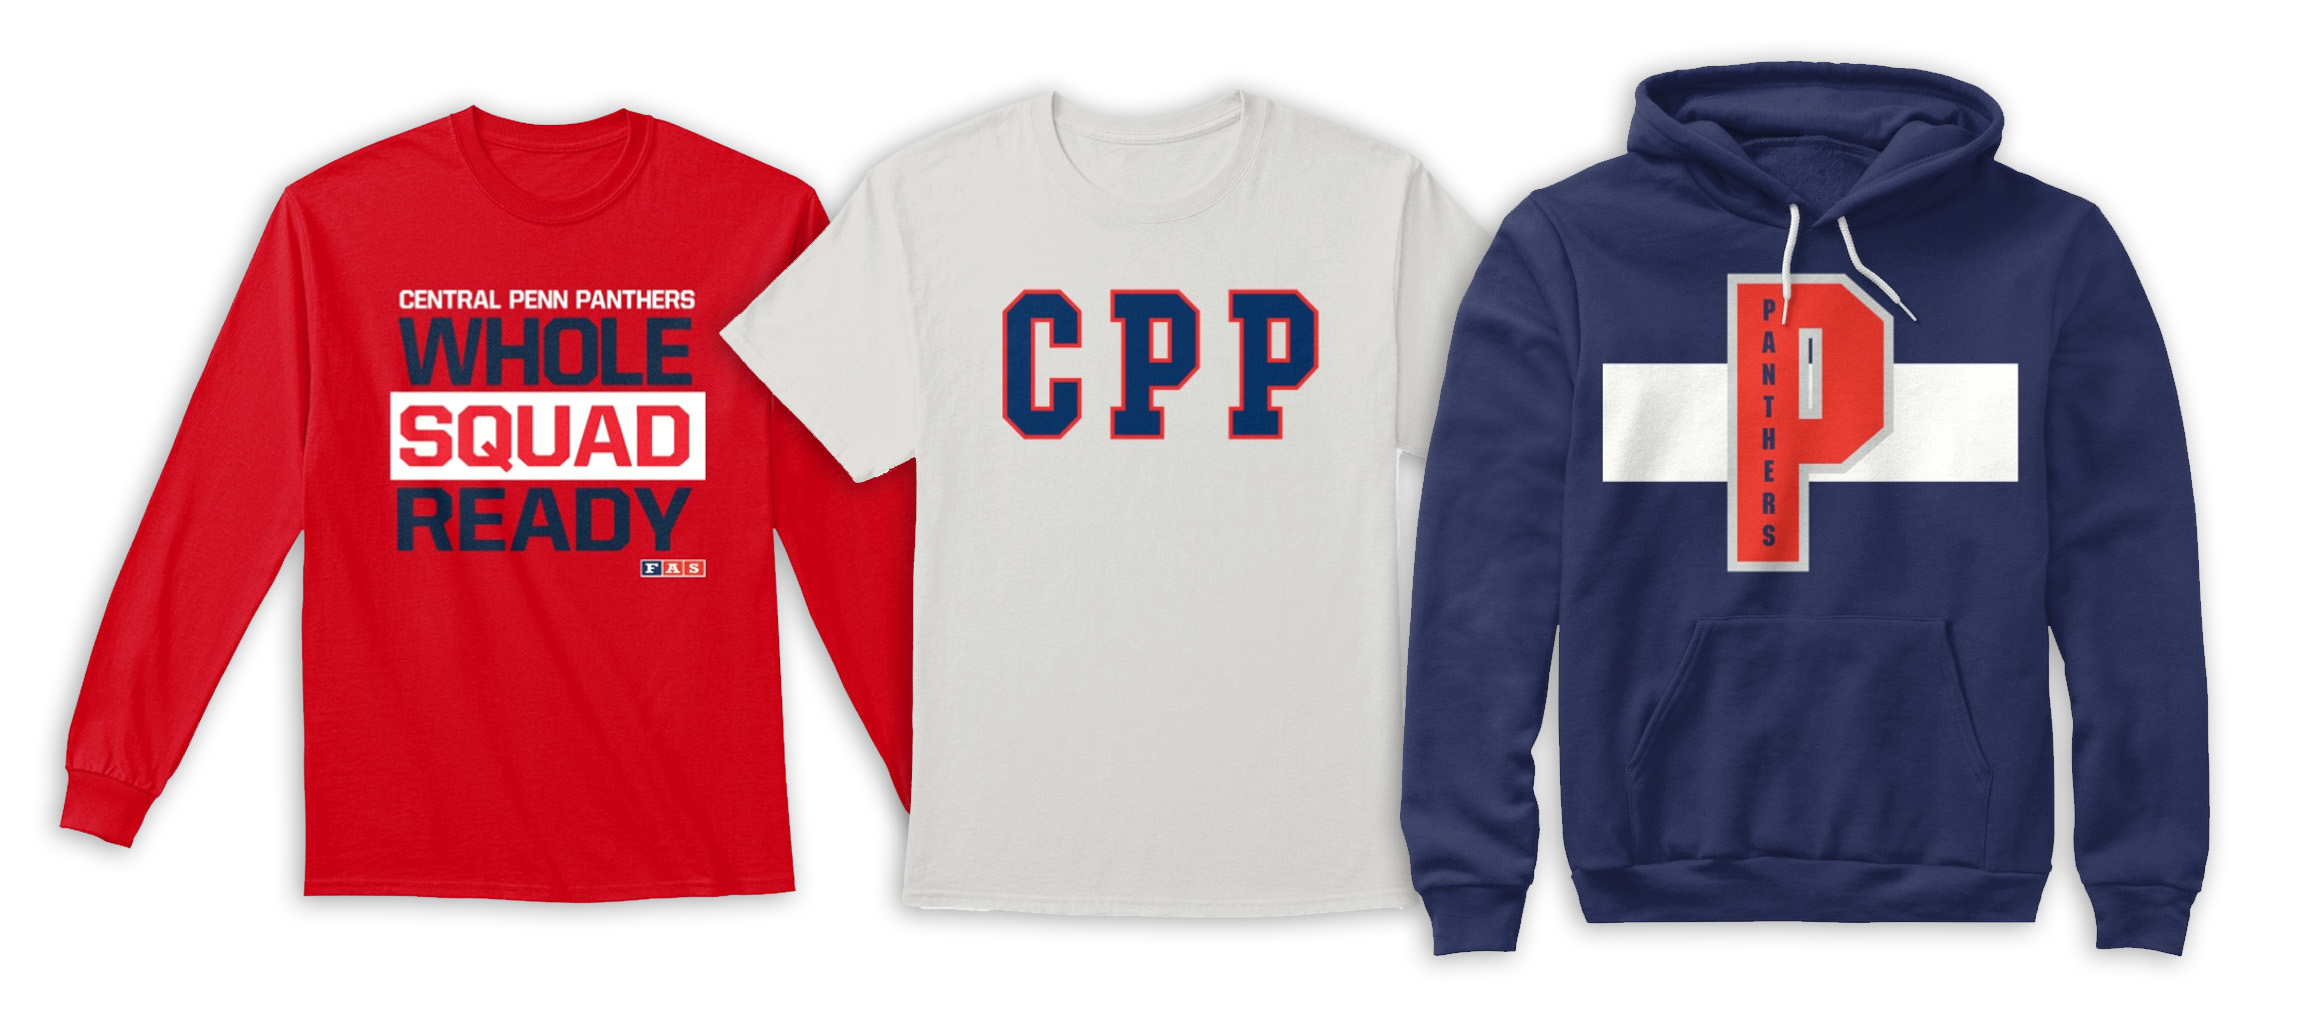 CPP on Shirts and More